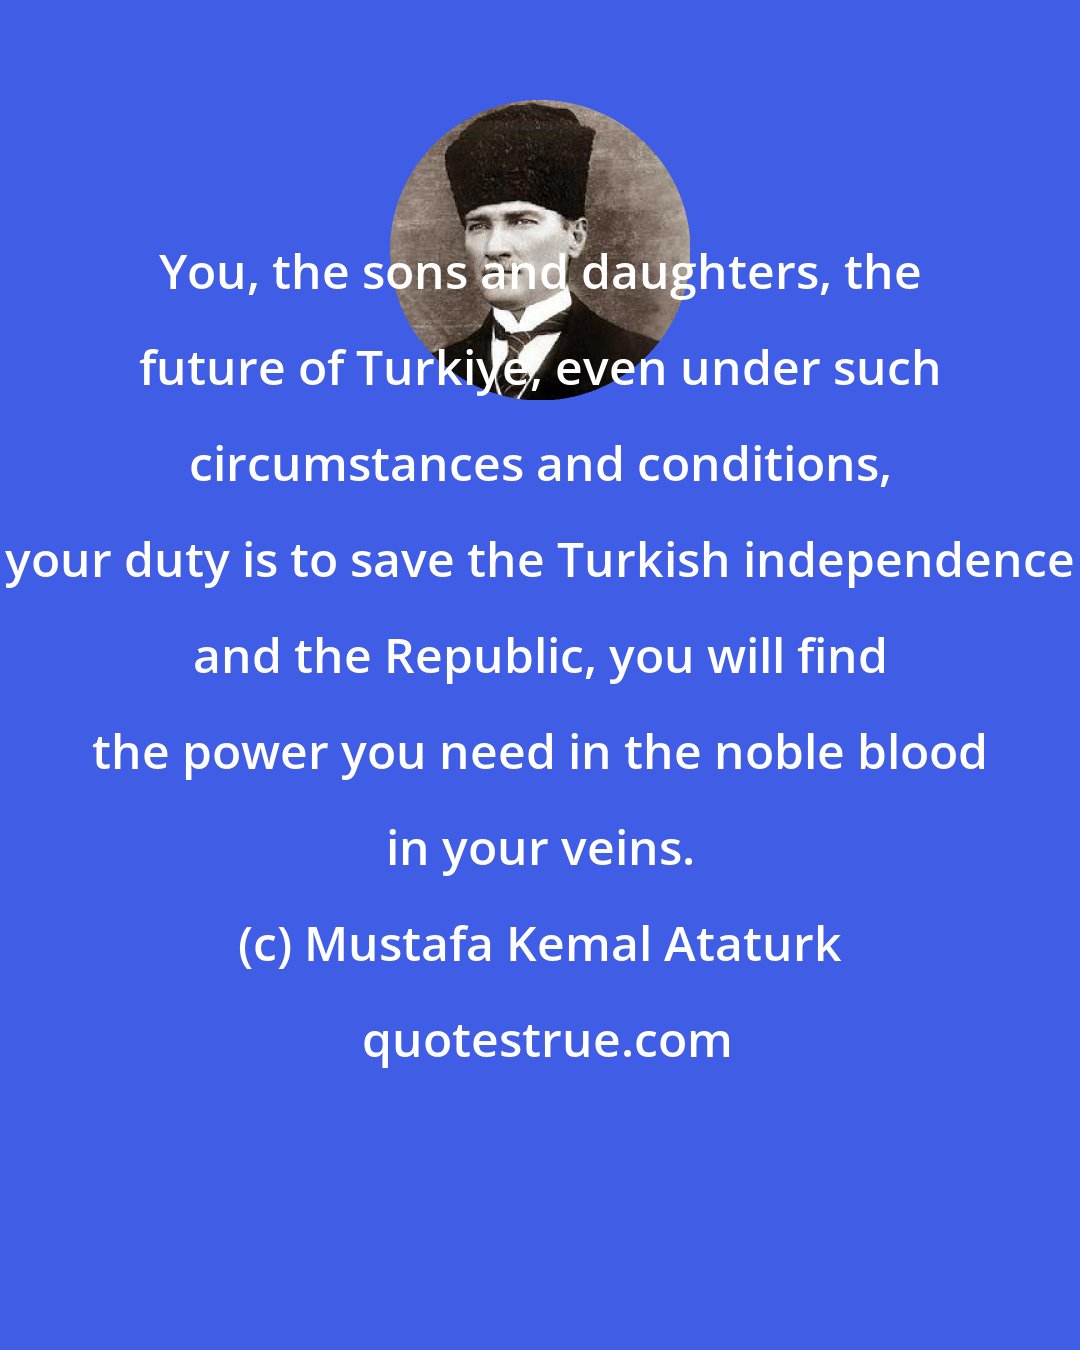 Mustafa Kemal Ataturk: You, the sons and daughters, the future of Turkiye, even under such circumstances and conditions, your duty is to save the Turkish independence and the Republic, you will find the power you need in the noble blood in your veins.